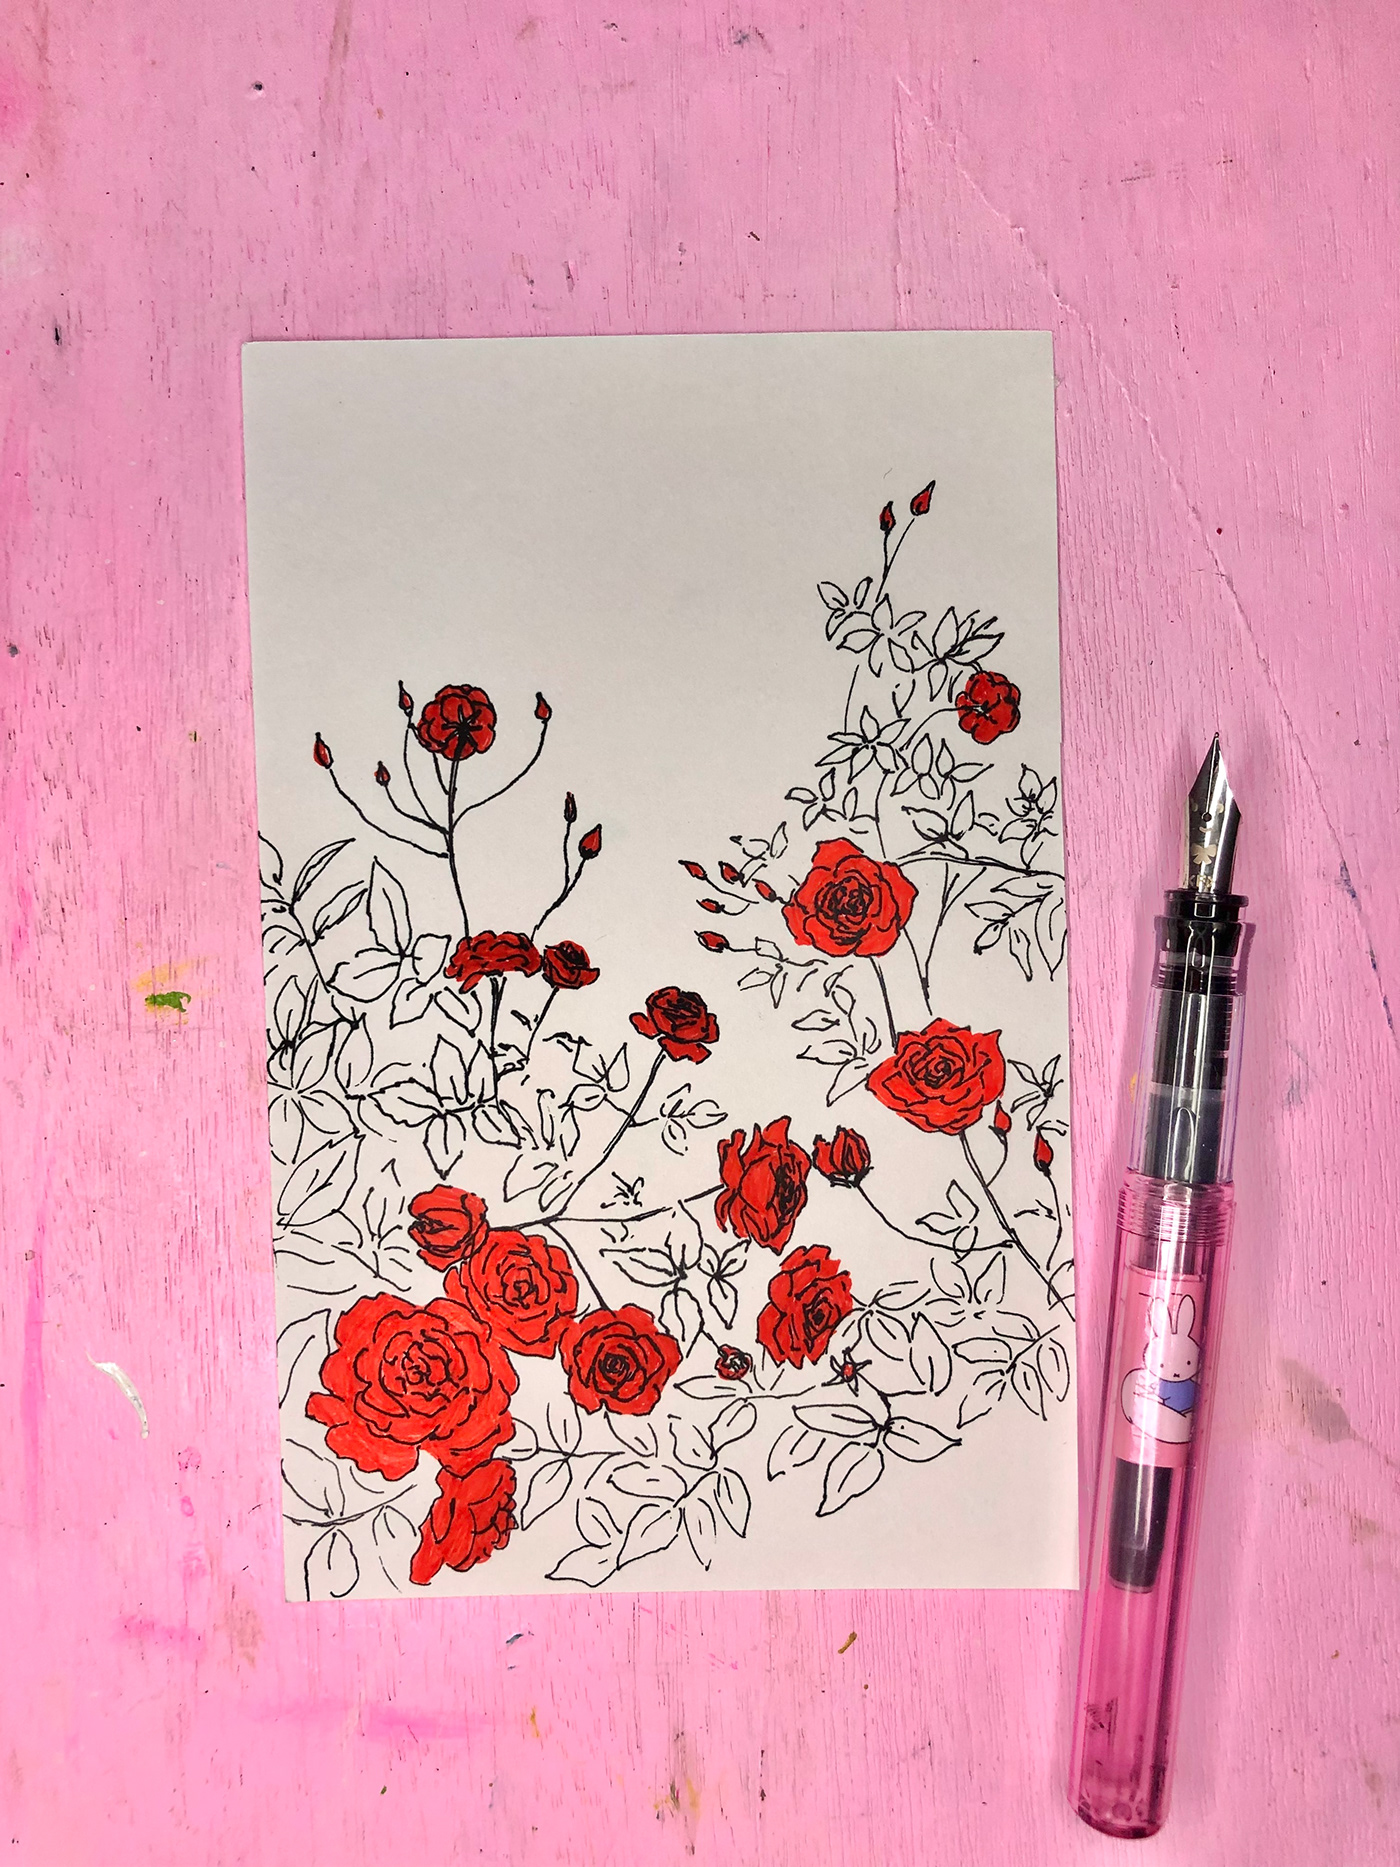 fountain pen Drawing  sketchbook plants ink on paper paper draw Roses Tree  Flowers line art comic black ink write story Holiday relax calm sketch life Hong Kong pens freehand story teller solitude healing therapy mood helpless pink colorful colors City Life city lonely 琉璃   art عربي